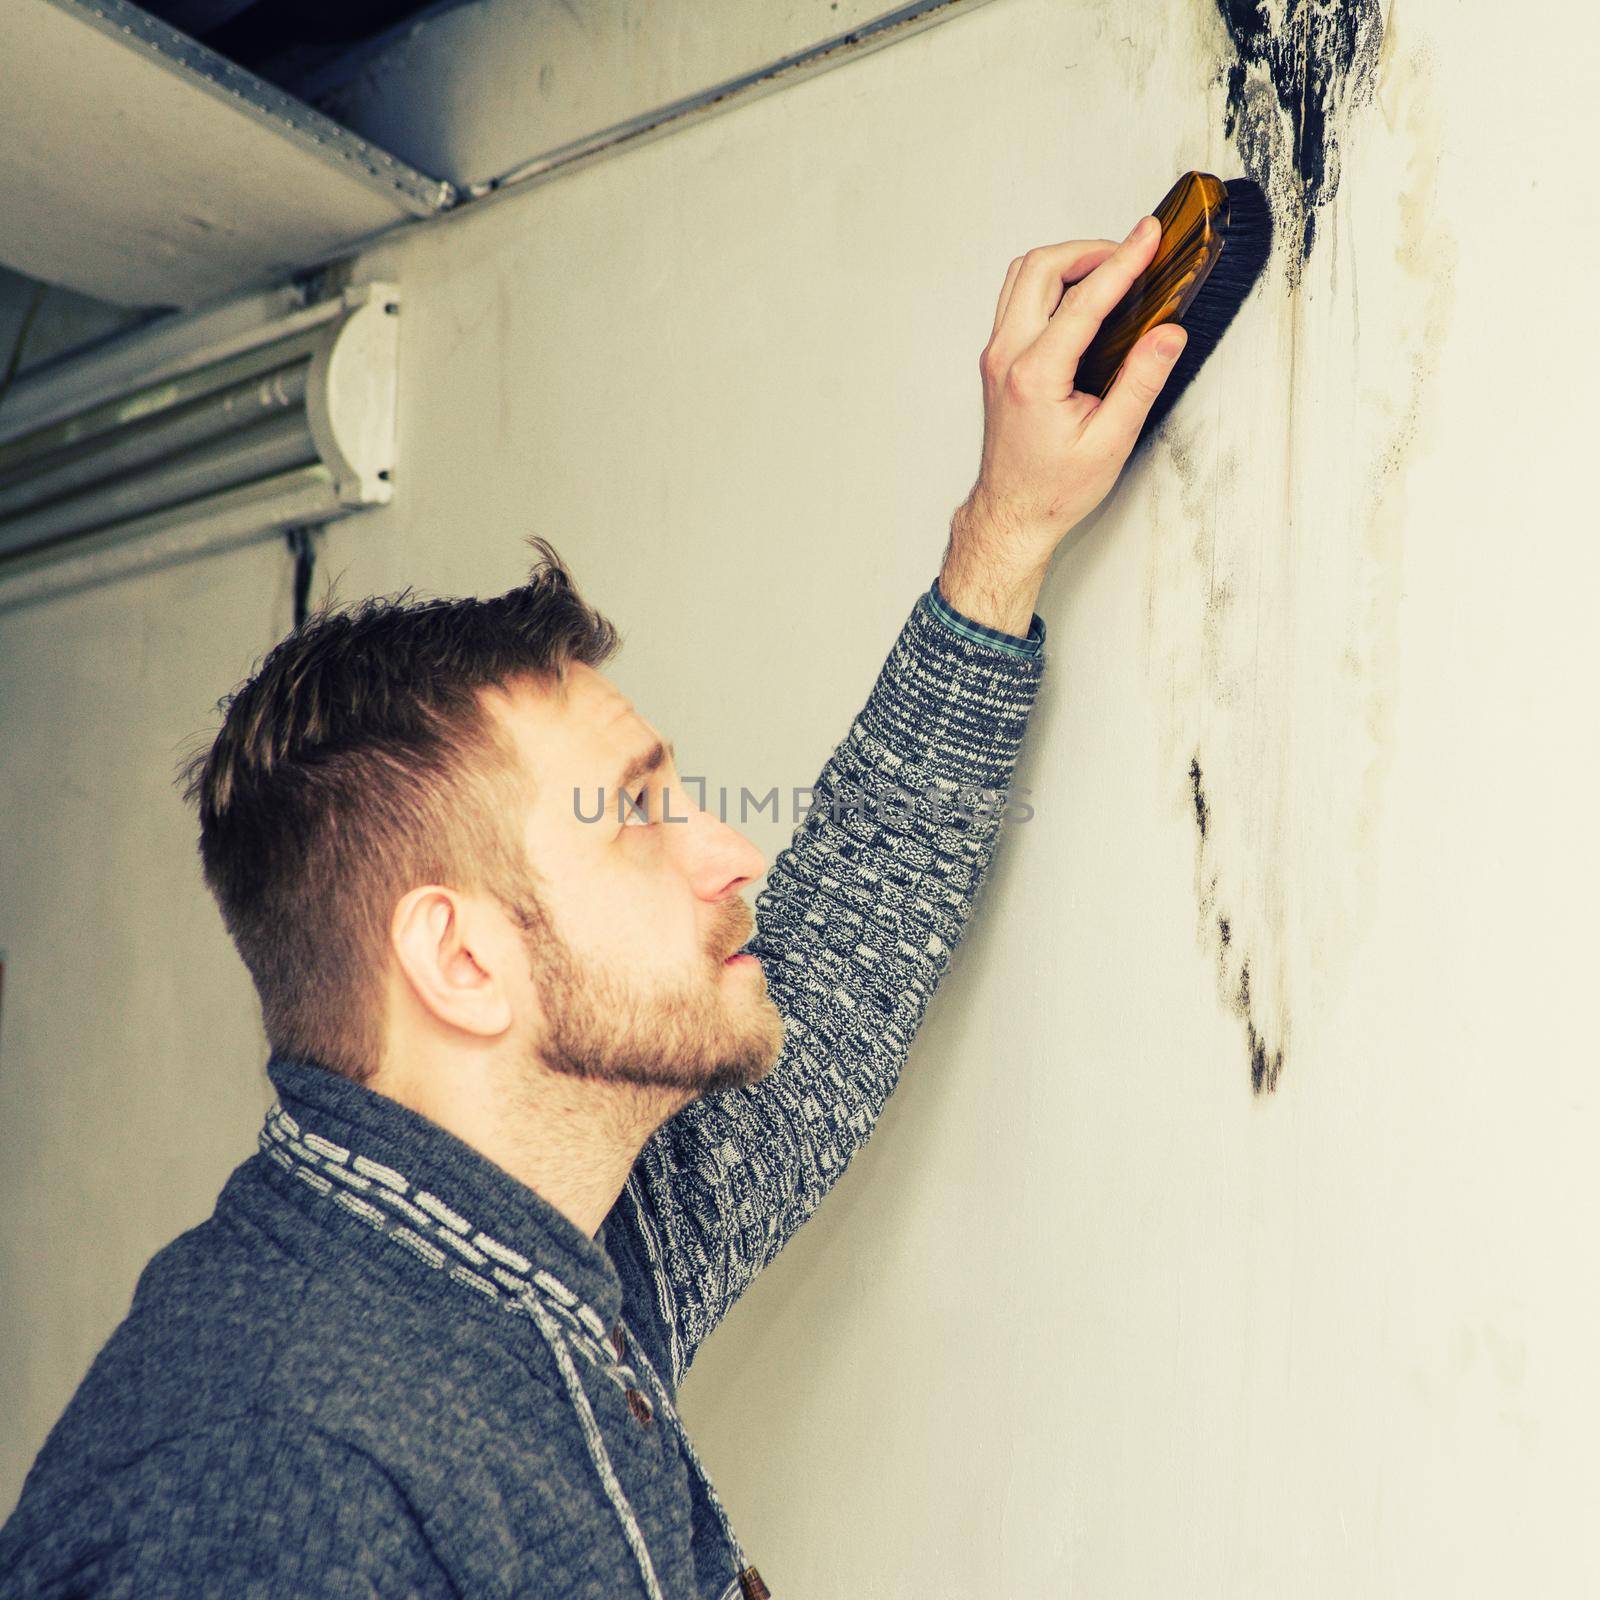 Bearded man removes black mold on the wall after leakage - Image Toned